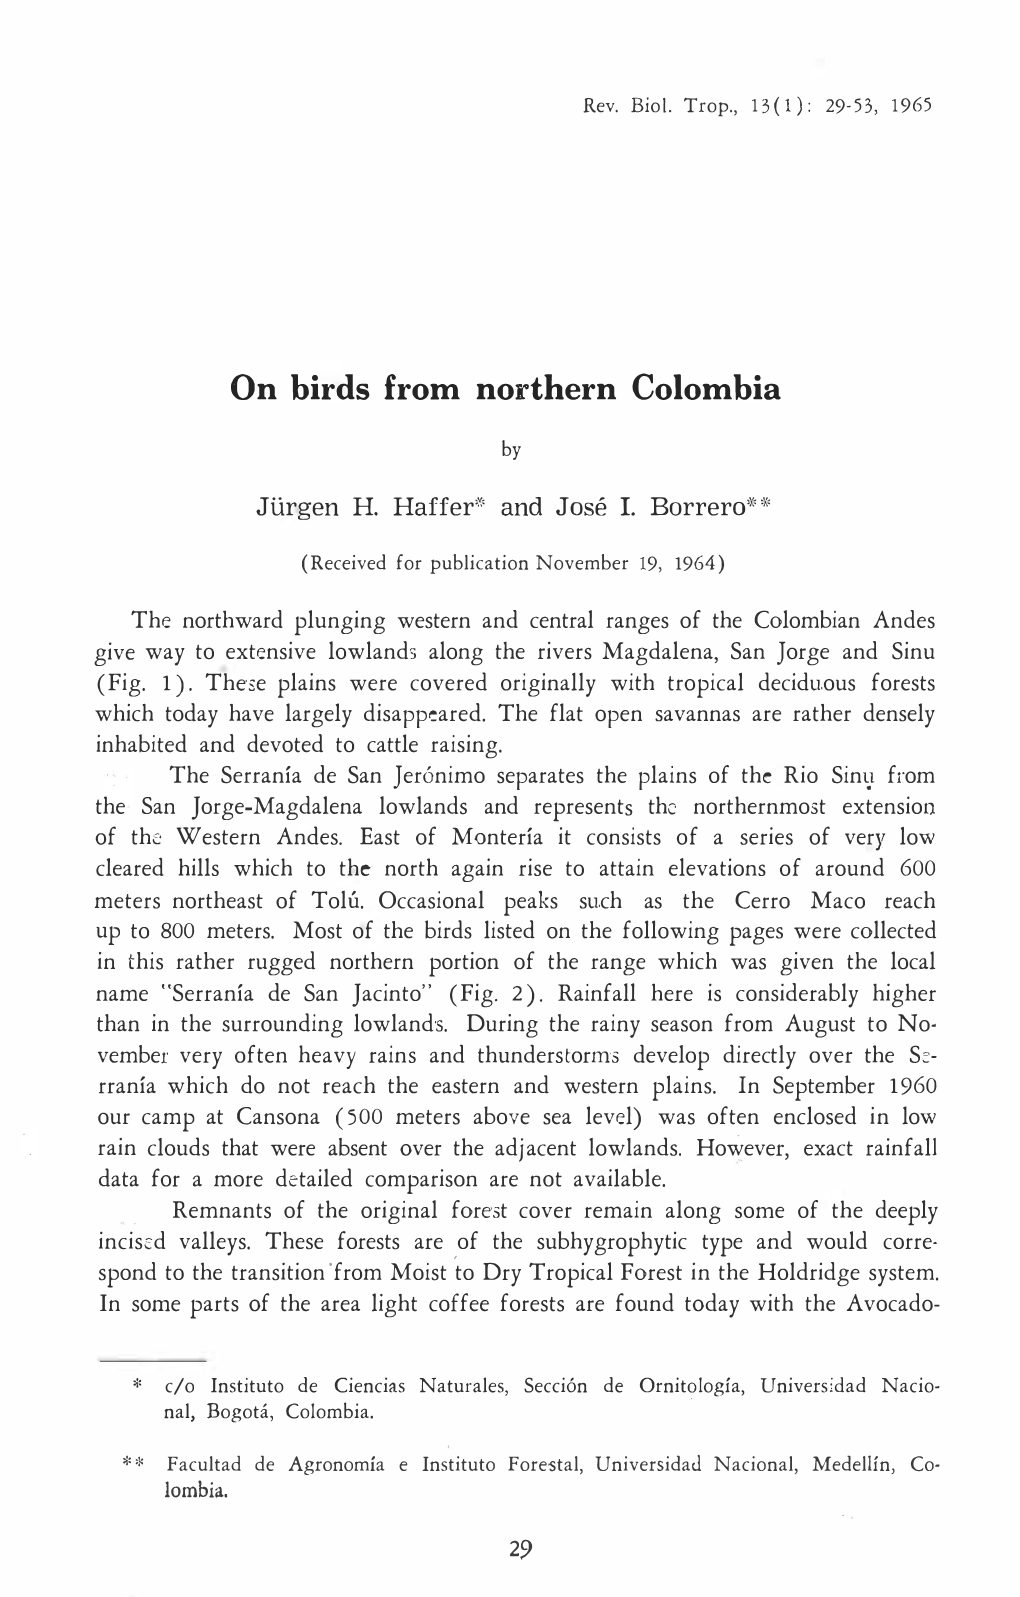 On Birds from Northern Colombia